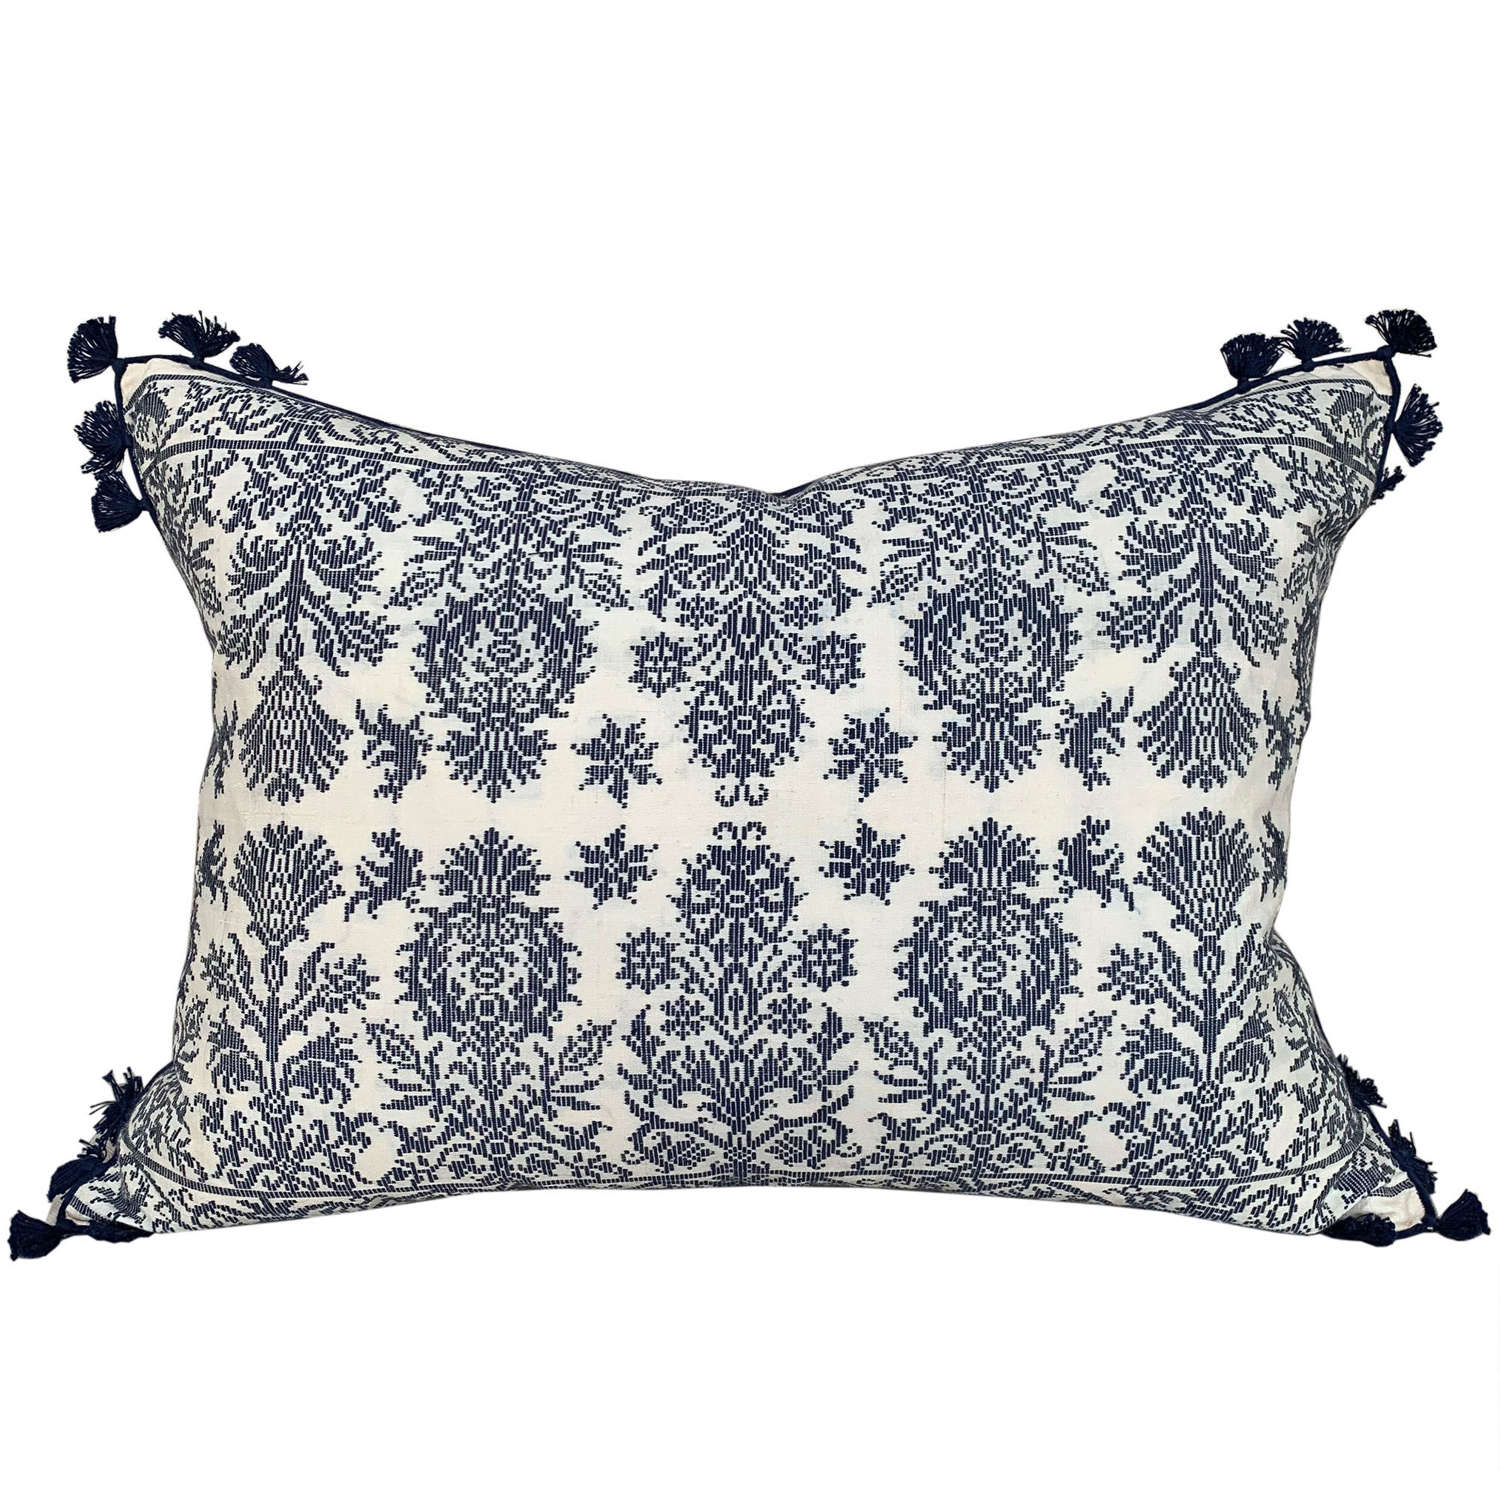 Magnificent Greek Embroidery Cushions